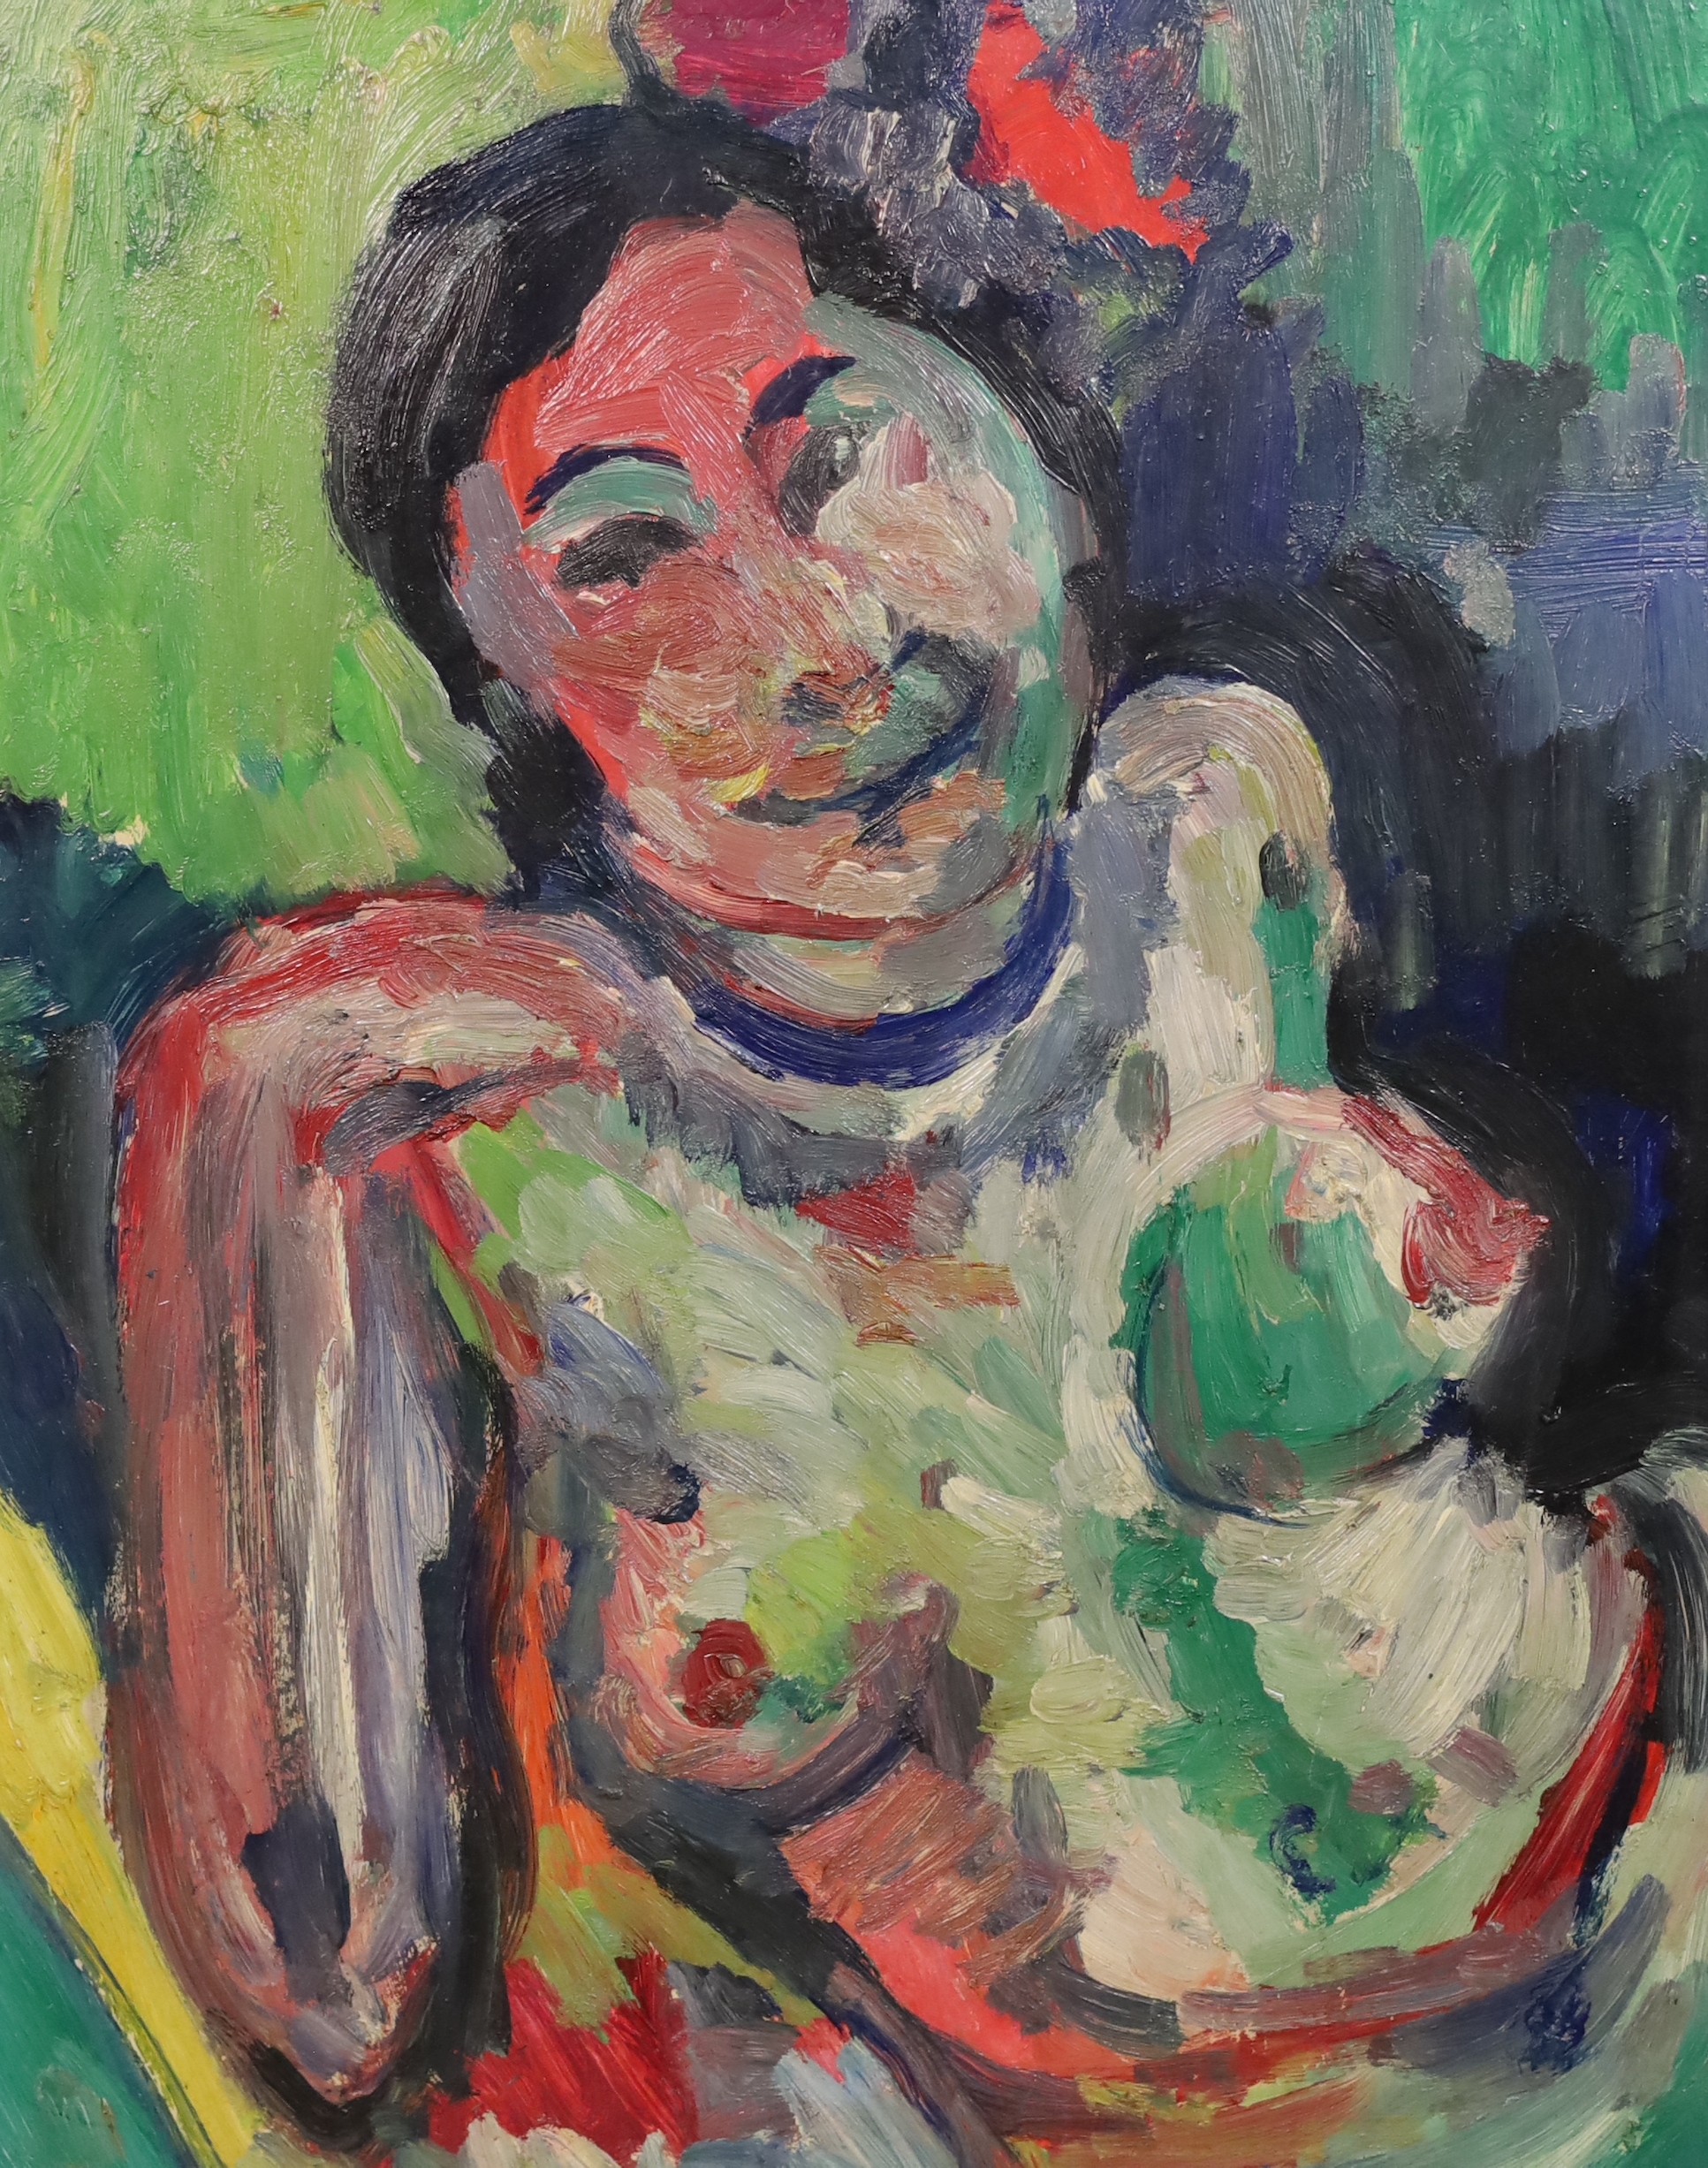 James Lawrence Isherwood (British, 1917- 1989) after Matisse, Female nude, oil on board, 49 x 39cm